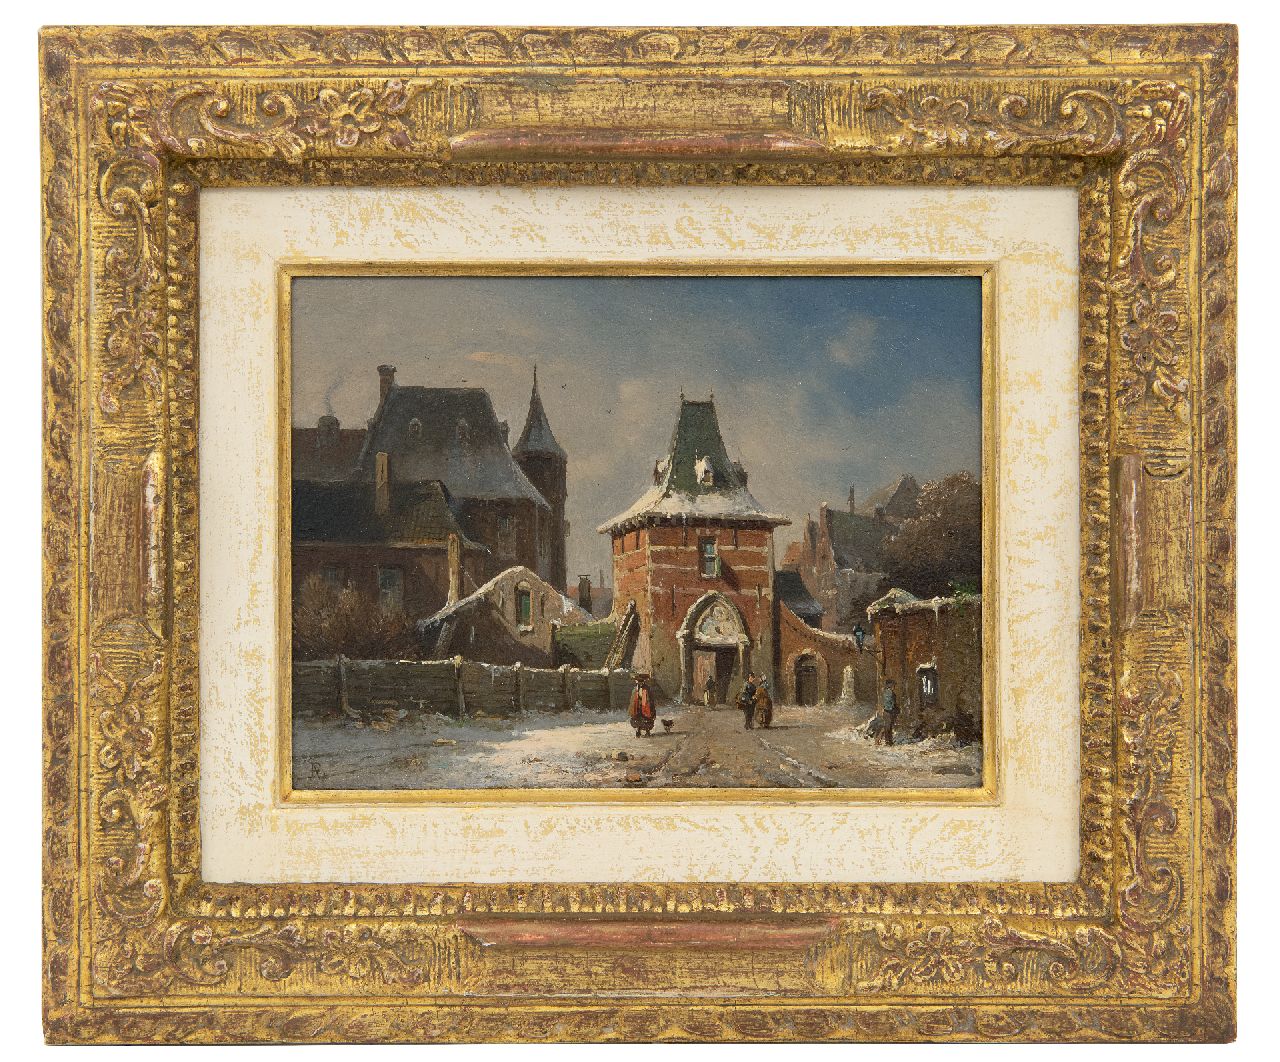 Eversen A.  | Adrianus Eversen, A town in winter with a gate, oil on panel 14.8 x 20.5 cm, signed l.l. with monogram